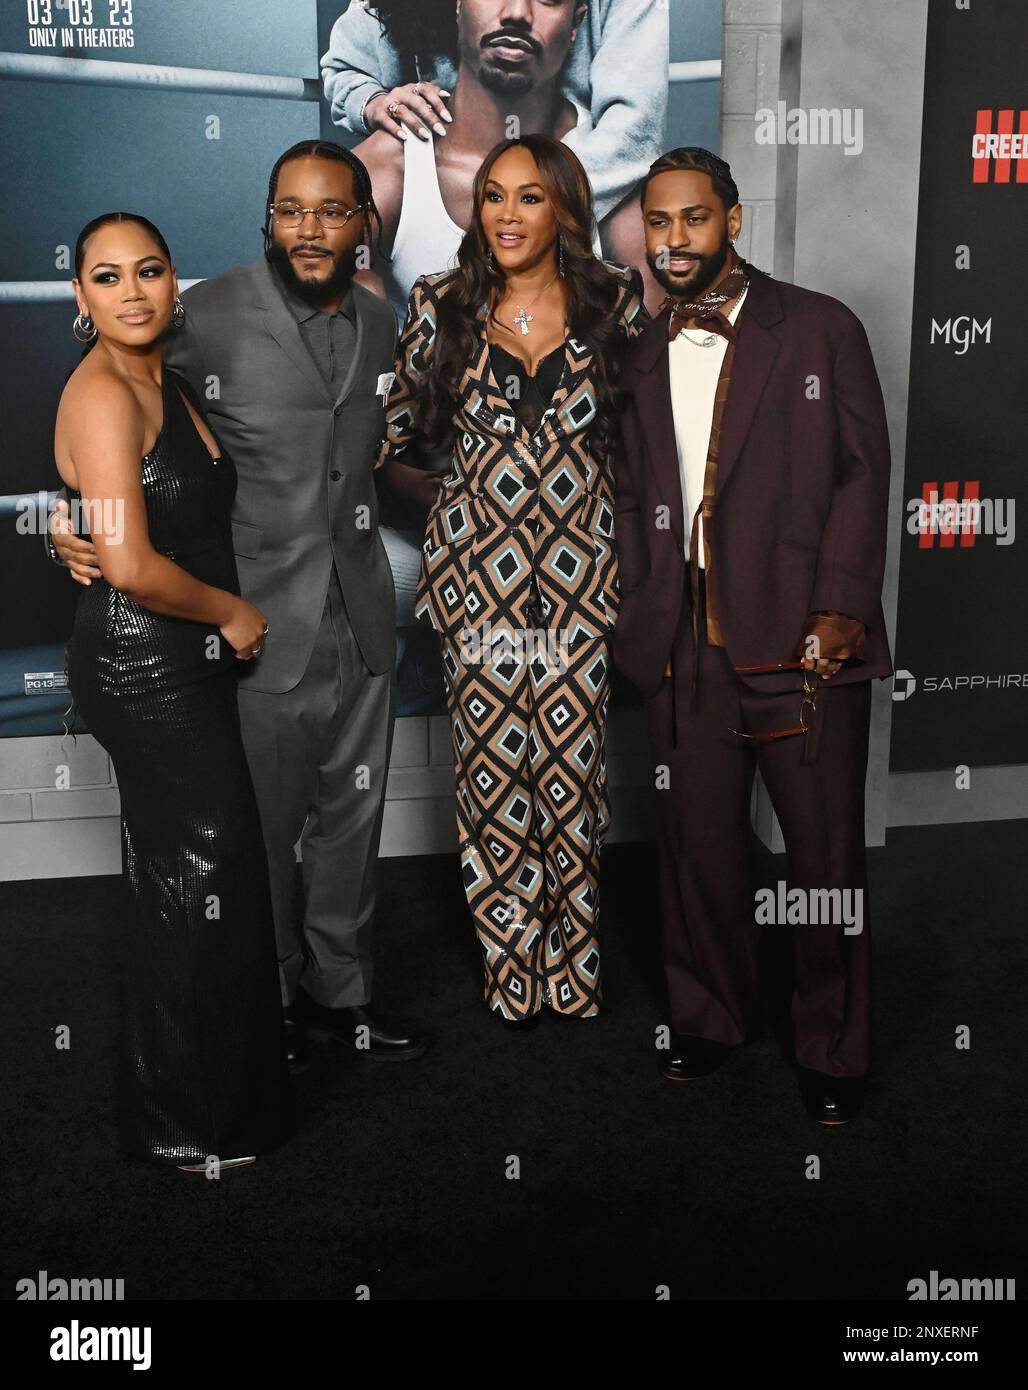 HOLLYWOOD, CALIFORNIA - FEBRUARY 27: (L-R) Zinzi Coogler, Ryan Coogler, Vivica A. Fox and Big Sean attend the Los Angeles Premiere of 'CREED III' at T Stock Photo